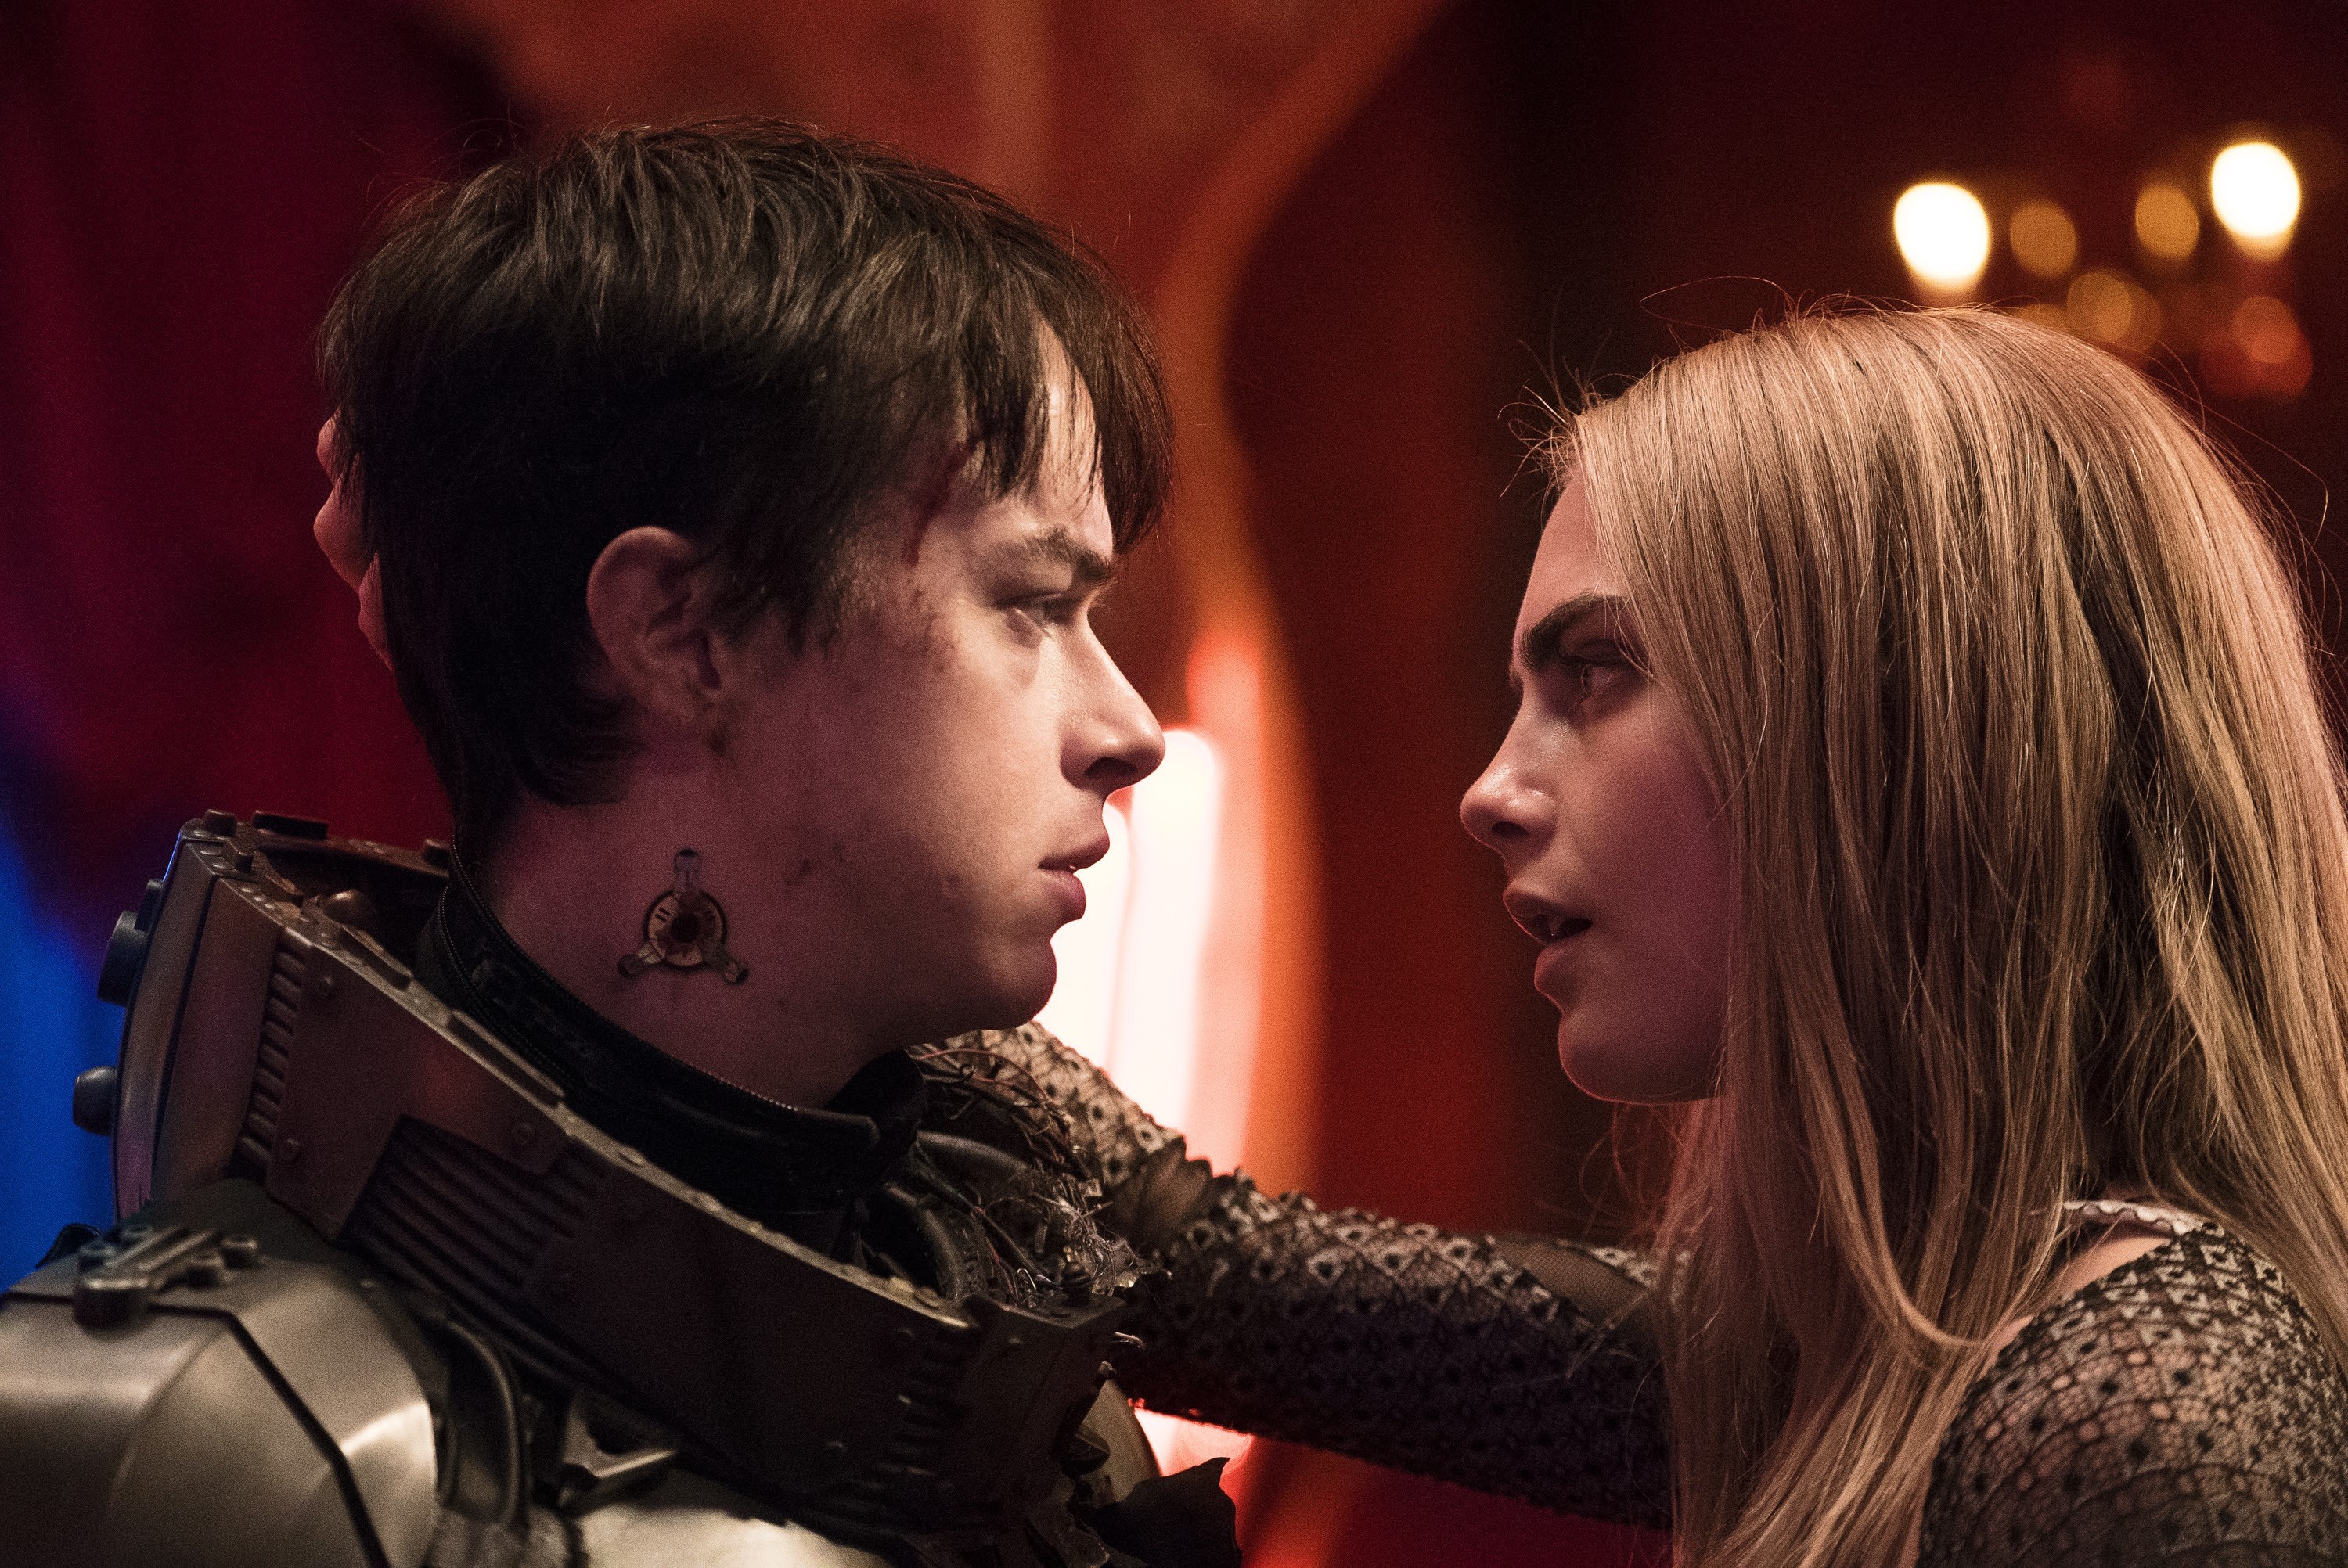 movie, valerian and the city of a thousand planets, blonde, cara delevingne, dane dehaan